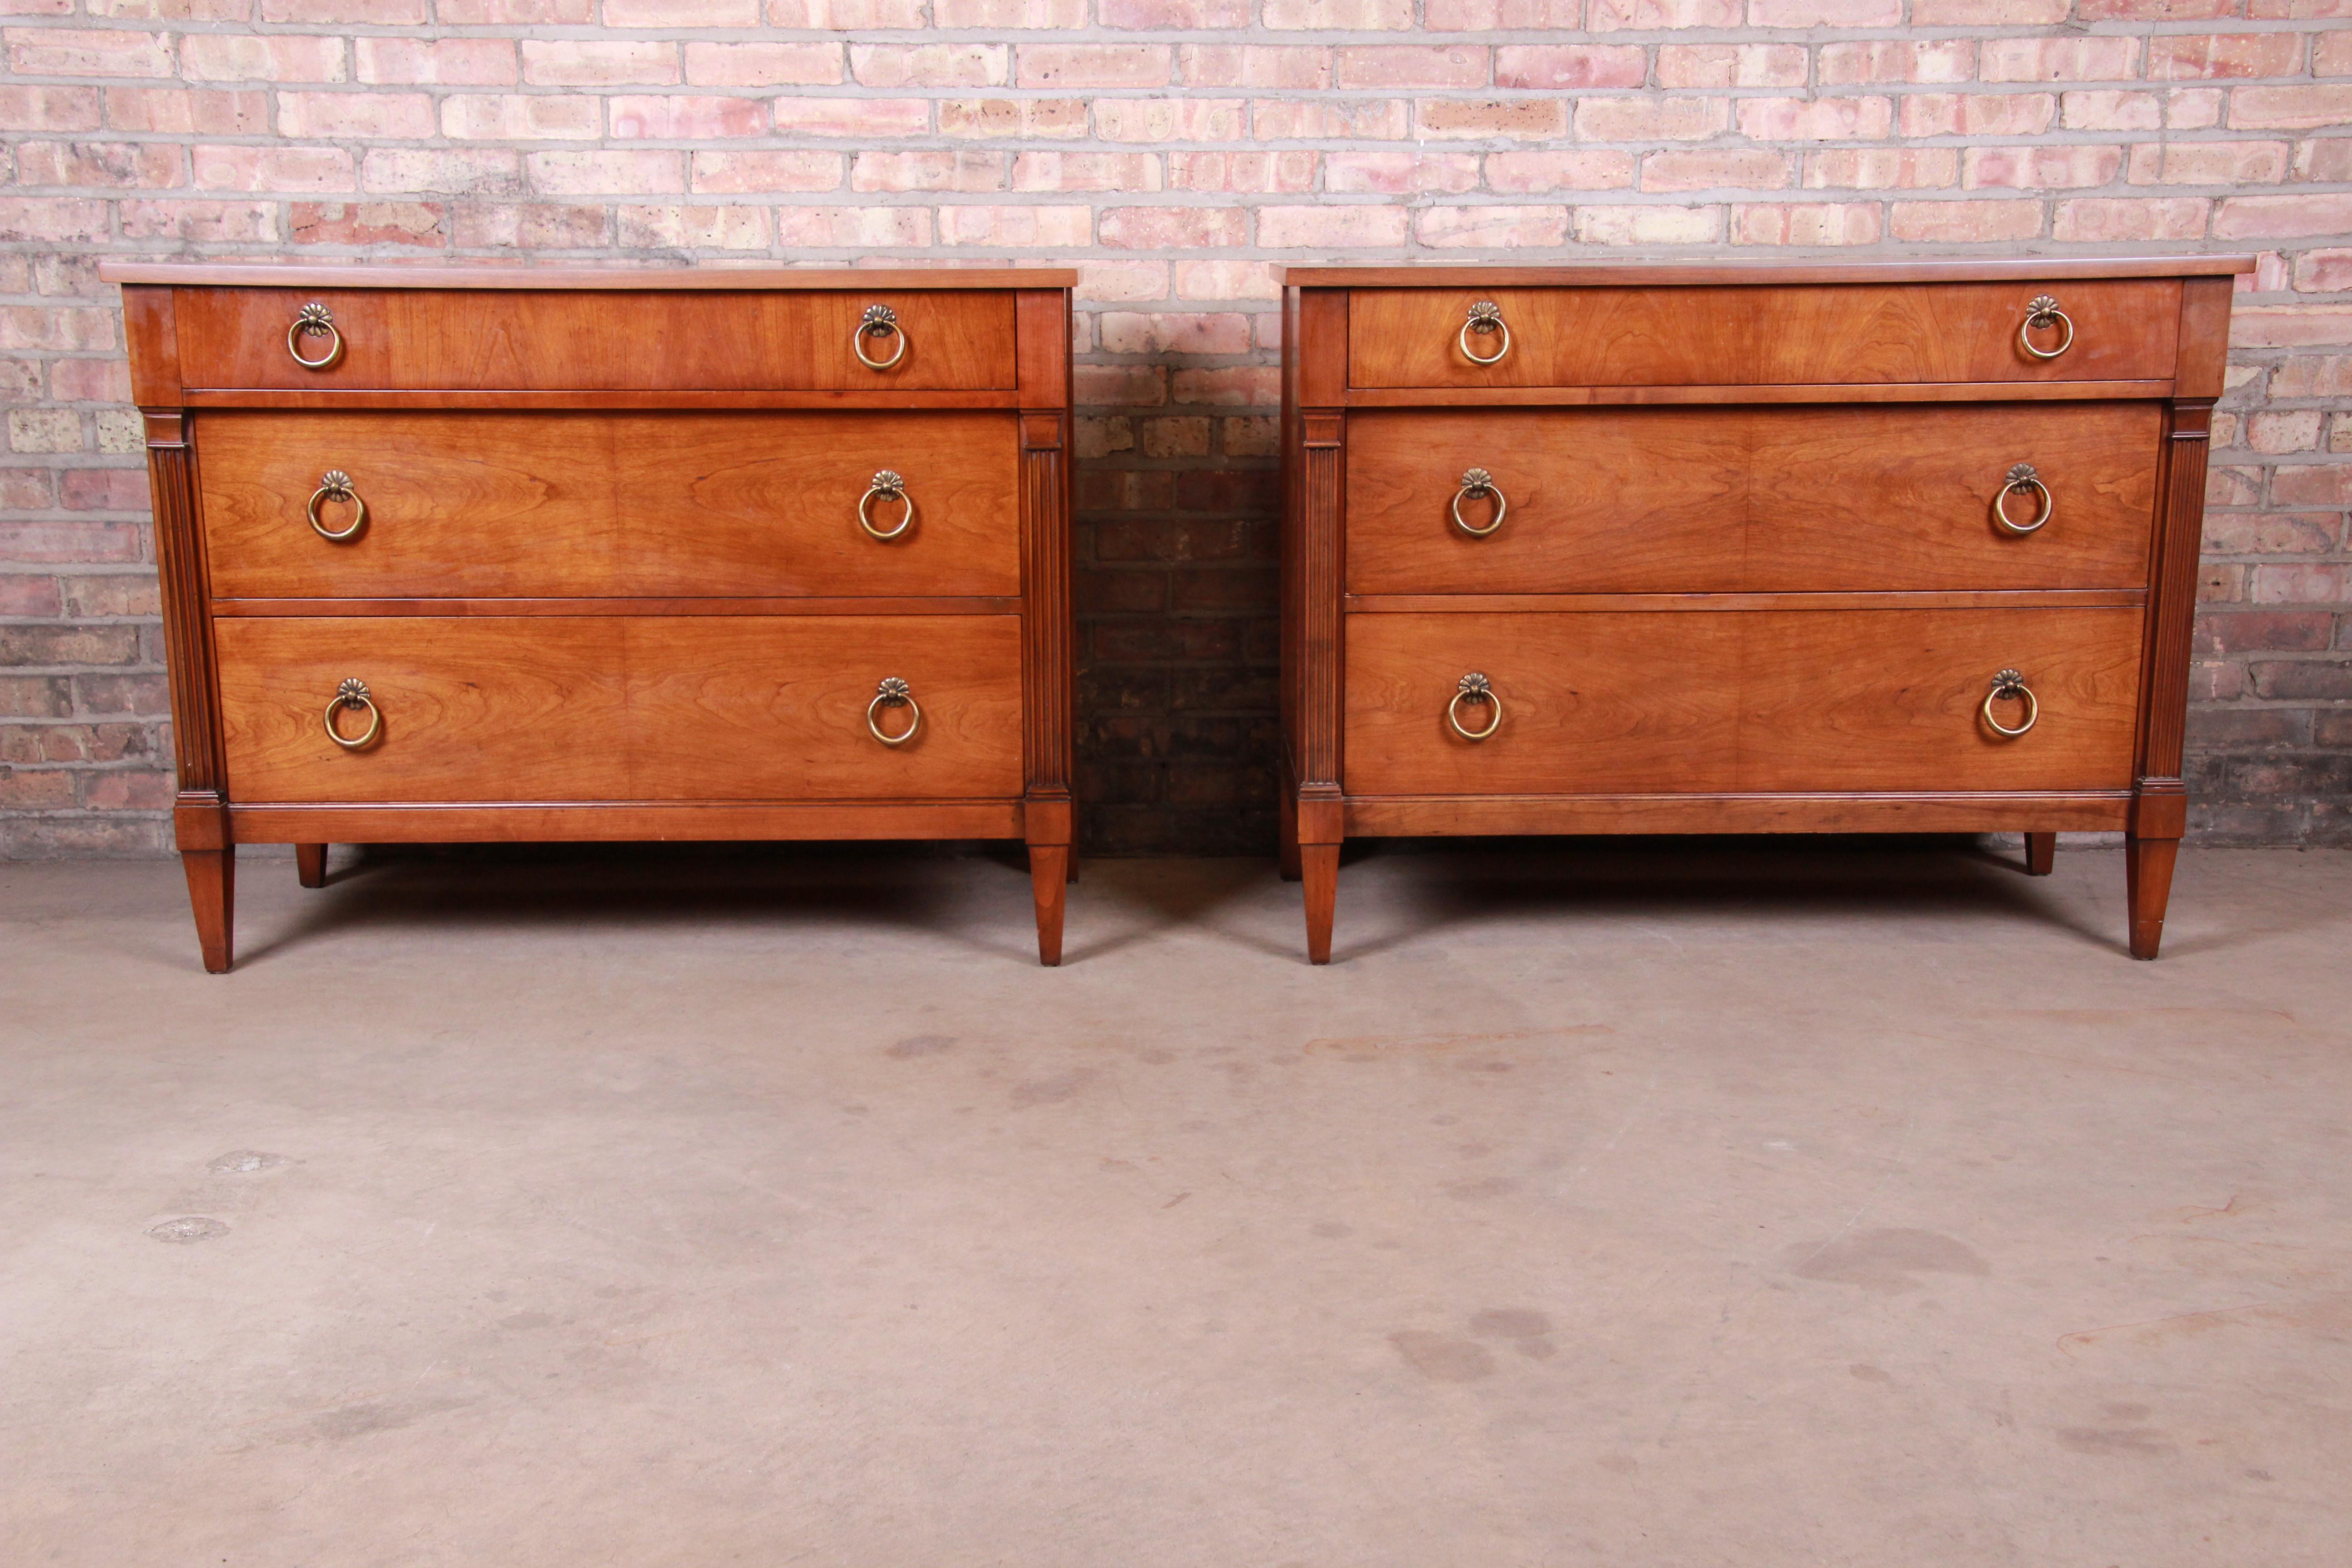 A gorgeous pair of French Regency Louis XVI style three-drawer dressers or bedside chests

By Baker Furniture 